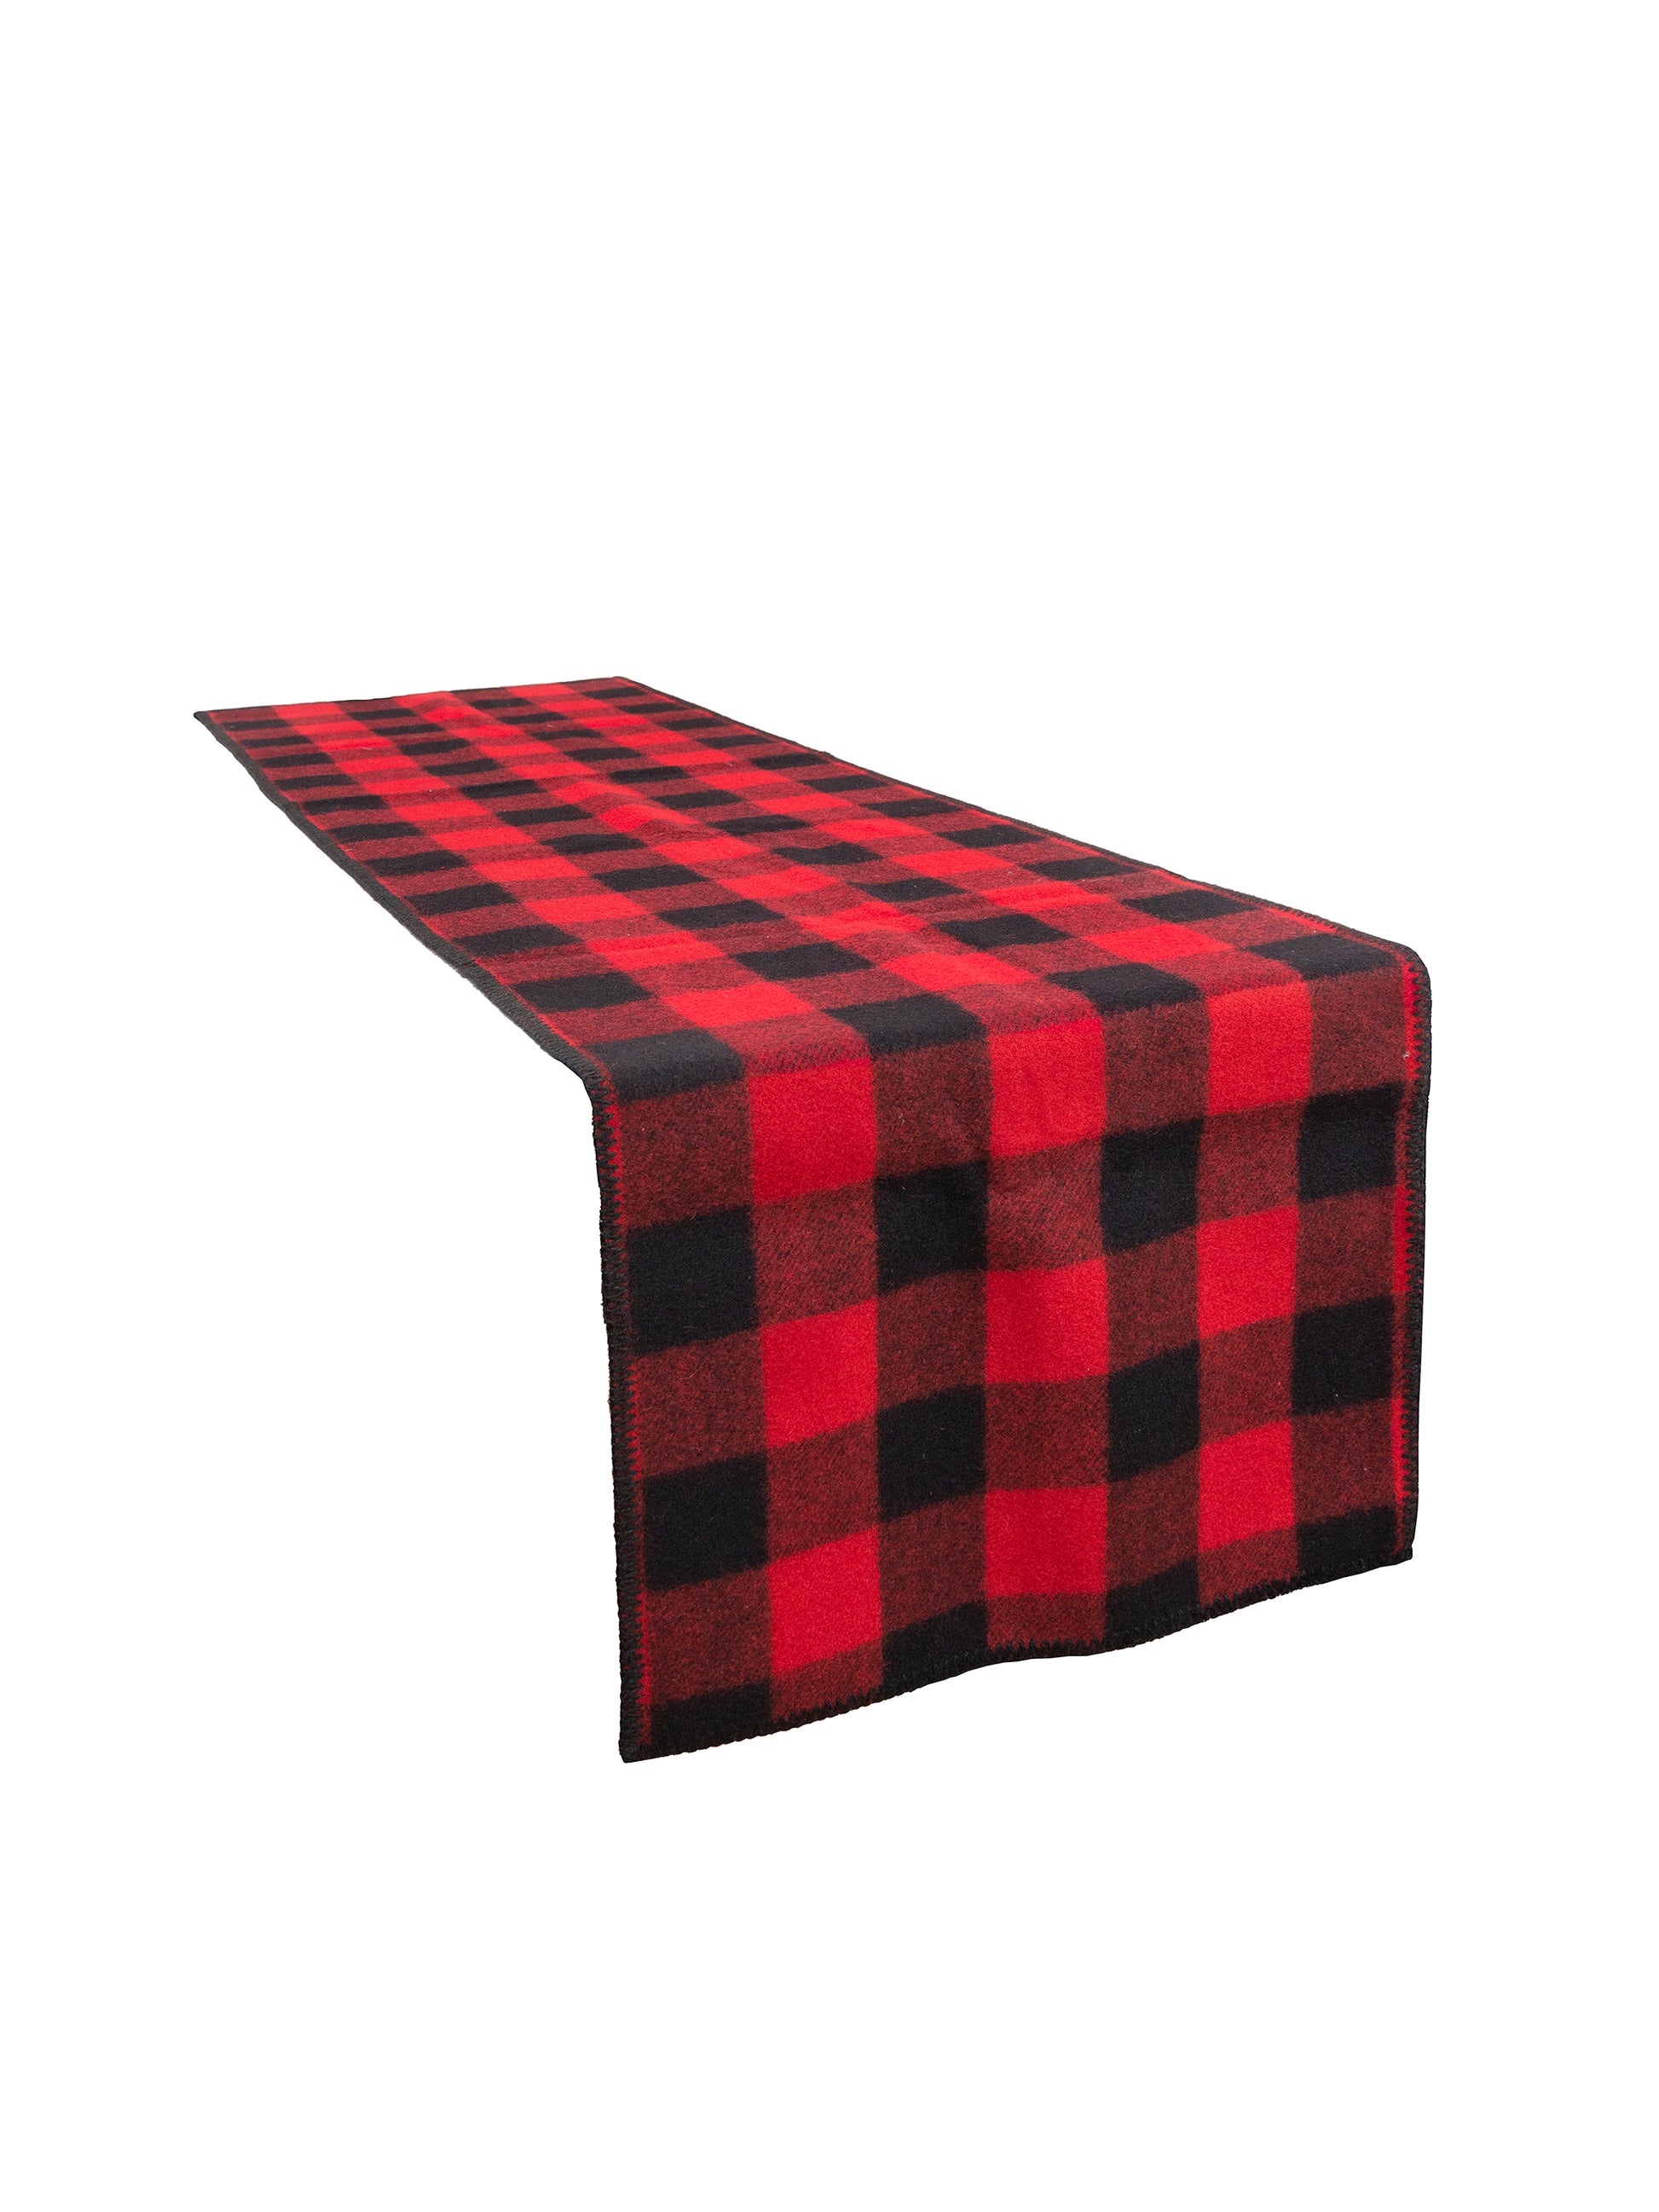 Faribault Woolen Mills Buffalo Check Red and Black Table Runner Weston Table